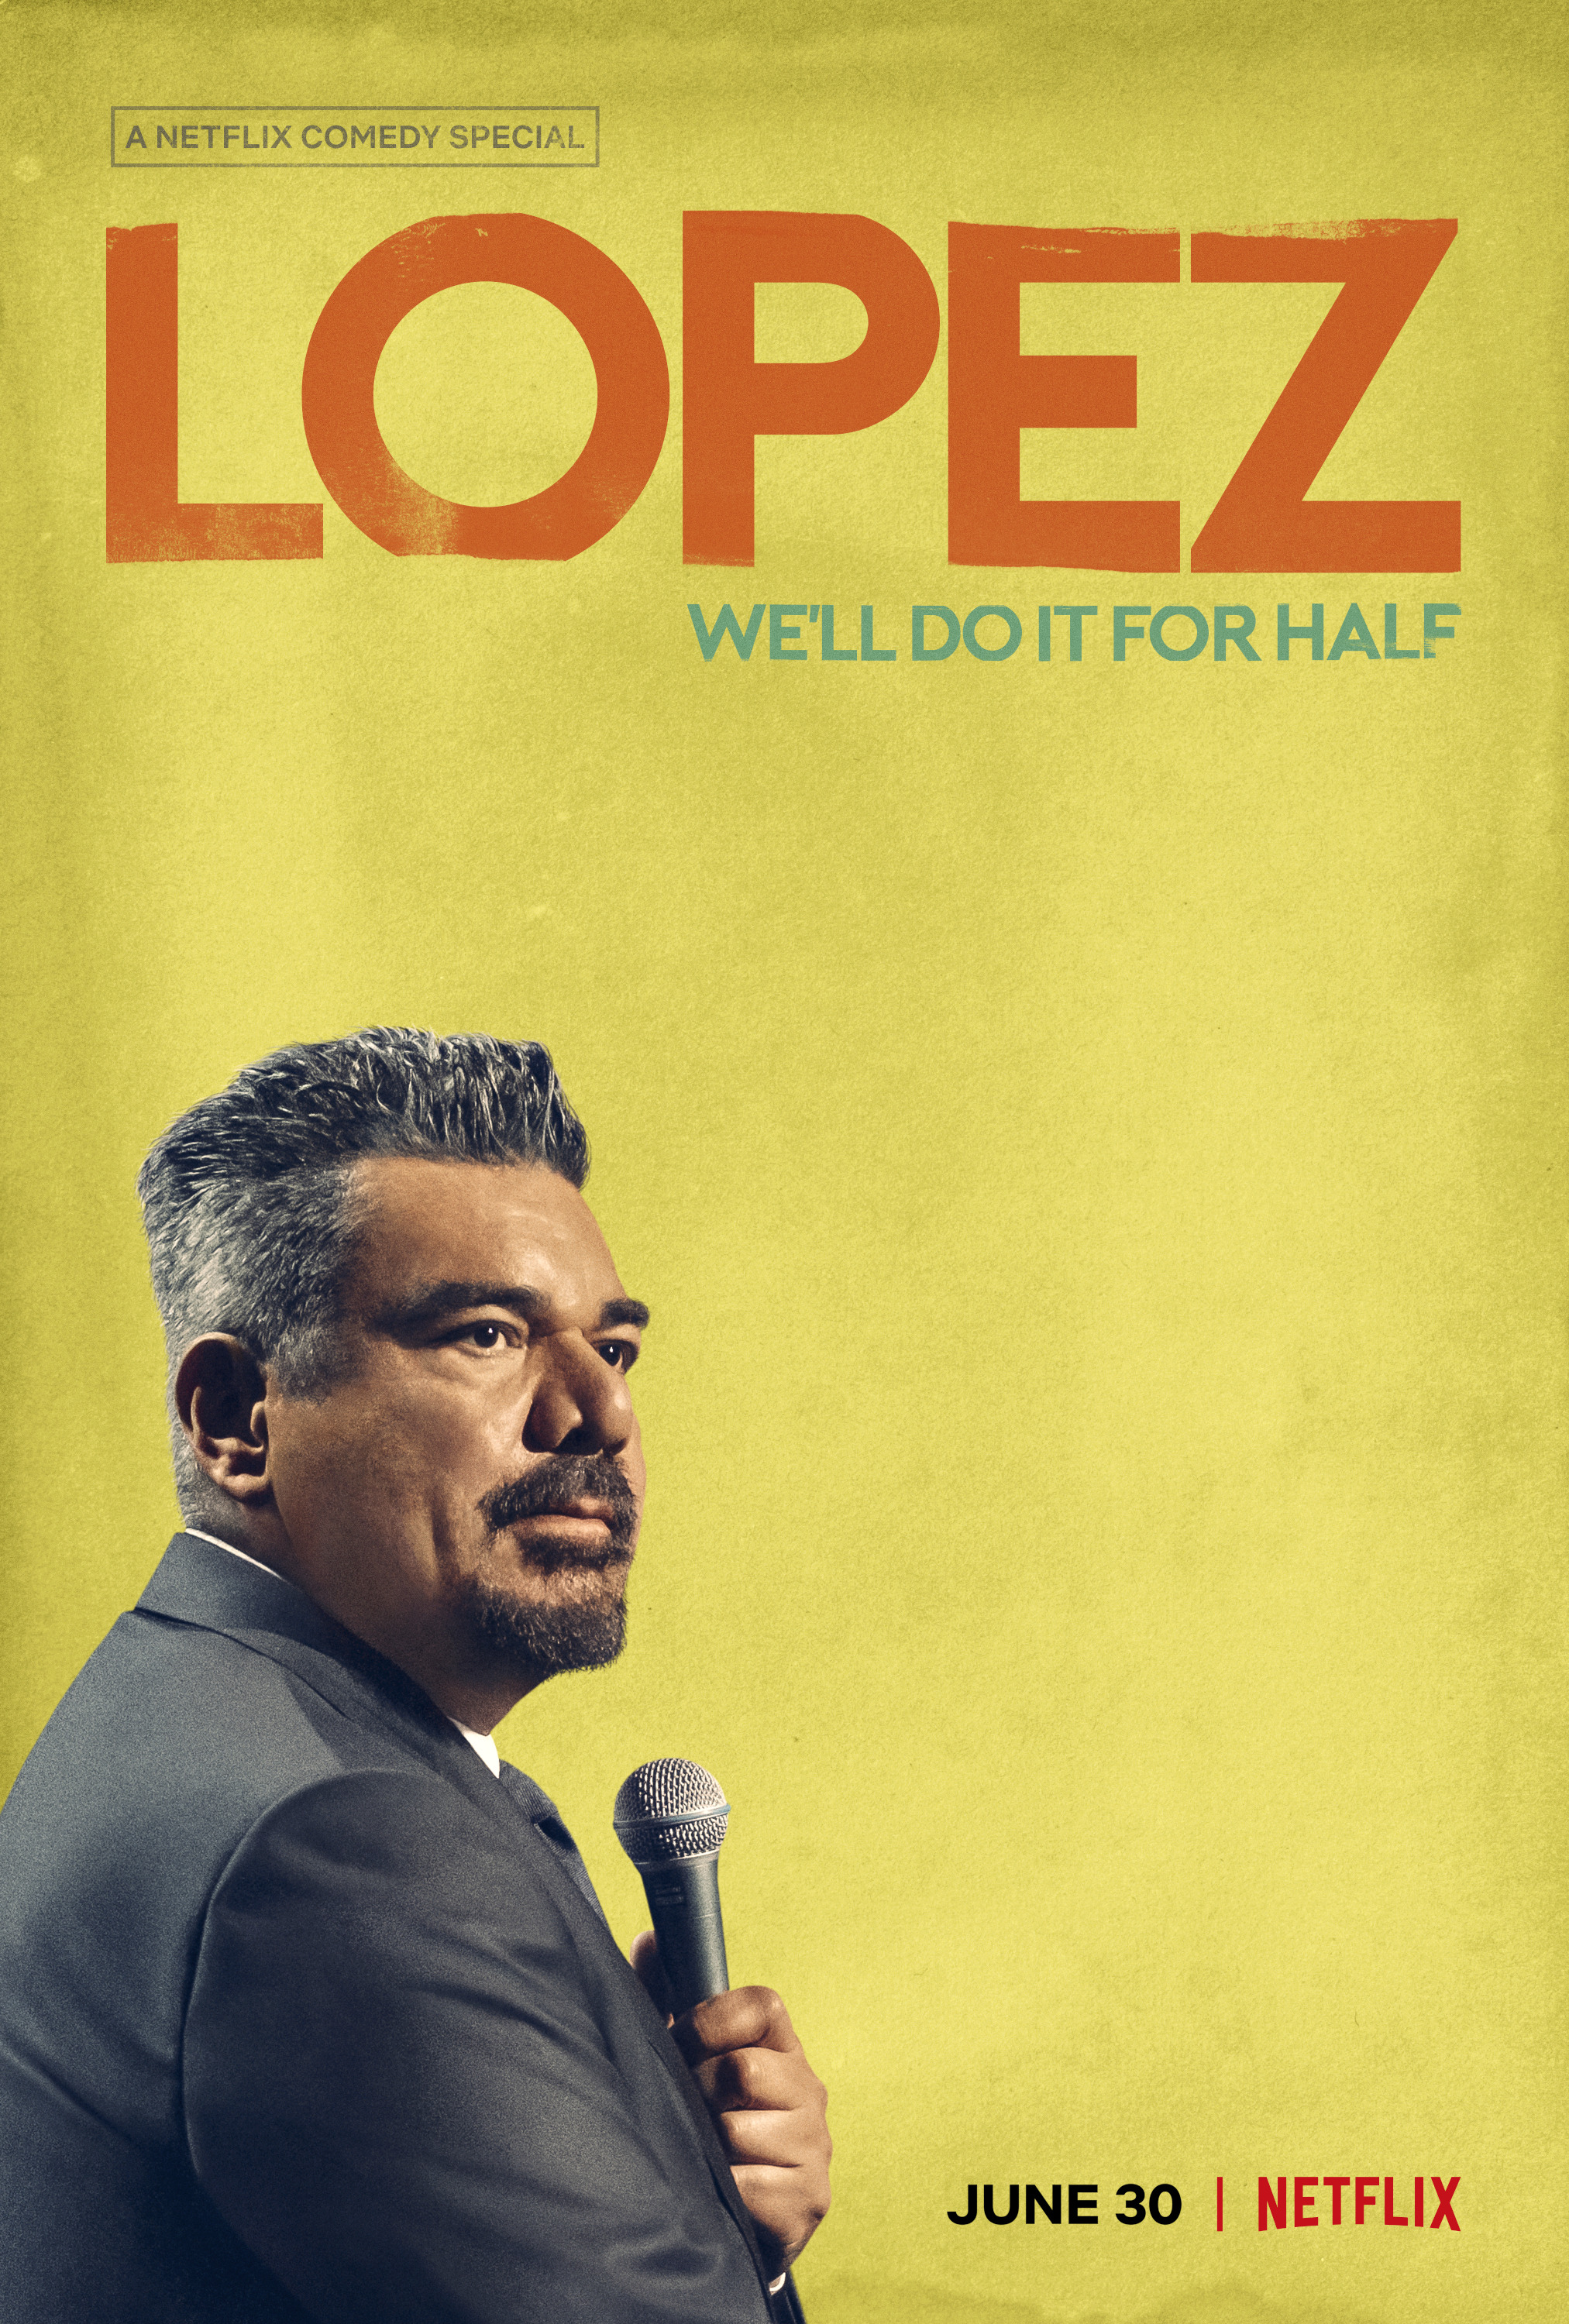 Mega Sized TV Poster Image for George Lopez: We'll Do It for Half 